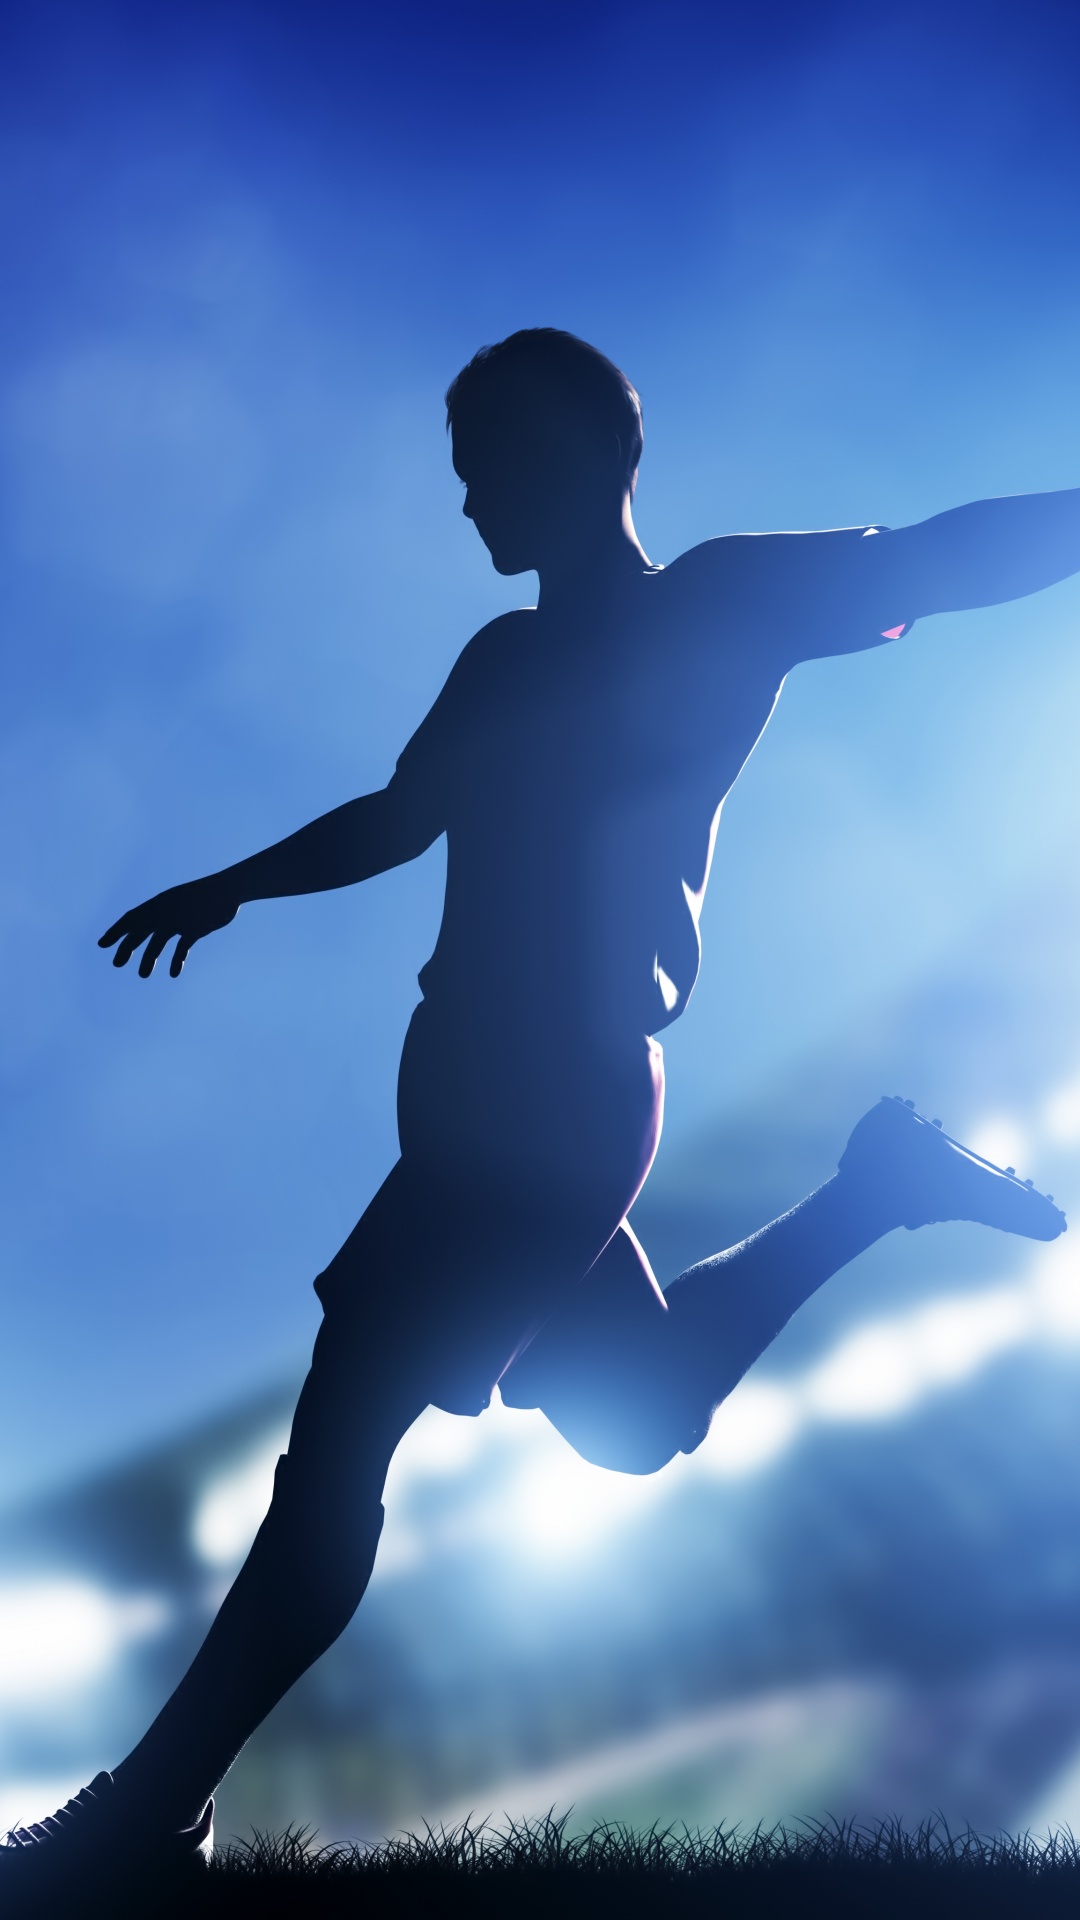 Man in Black Shorts Playing Soccer Ball. Wallpaper in 1080x1920 Resolution